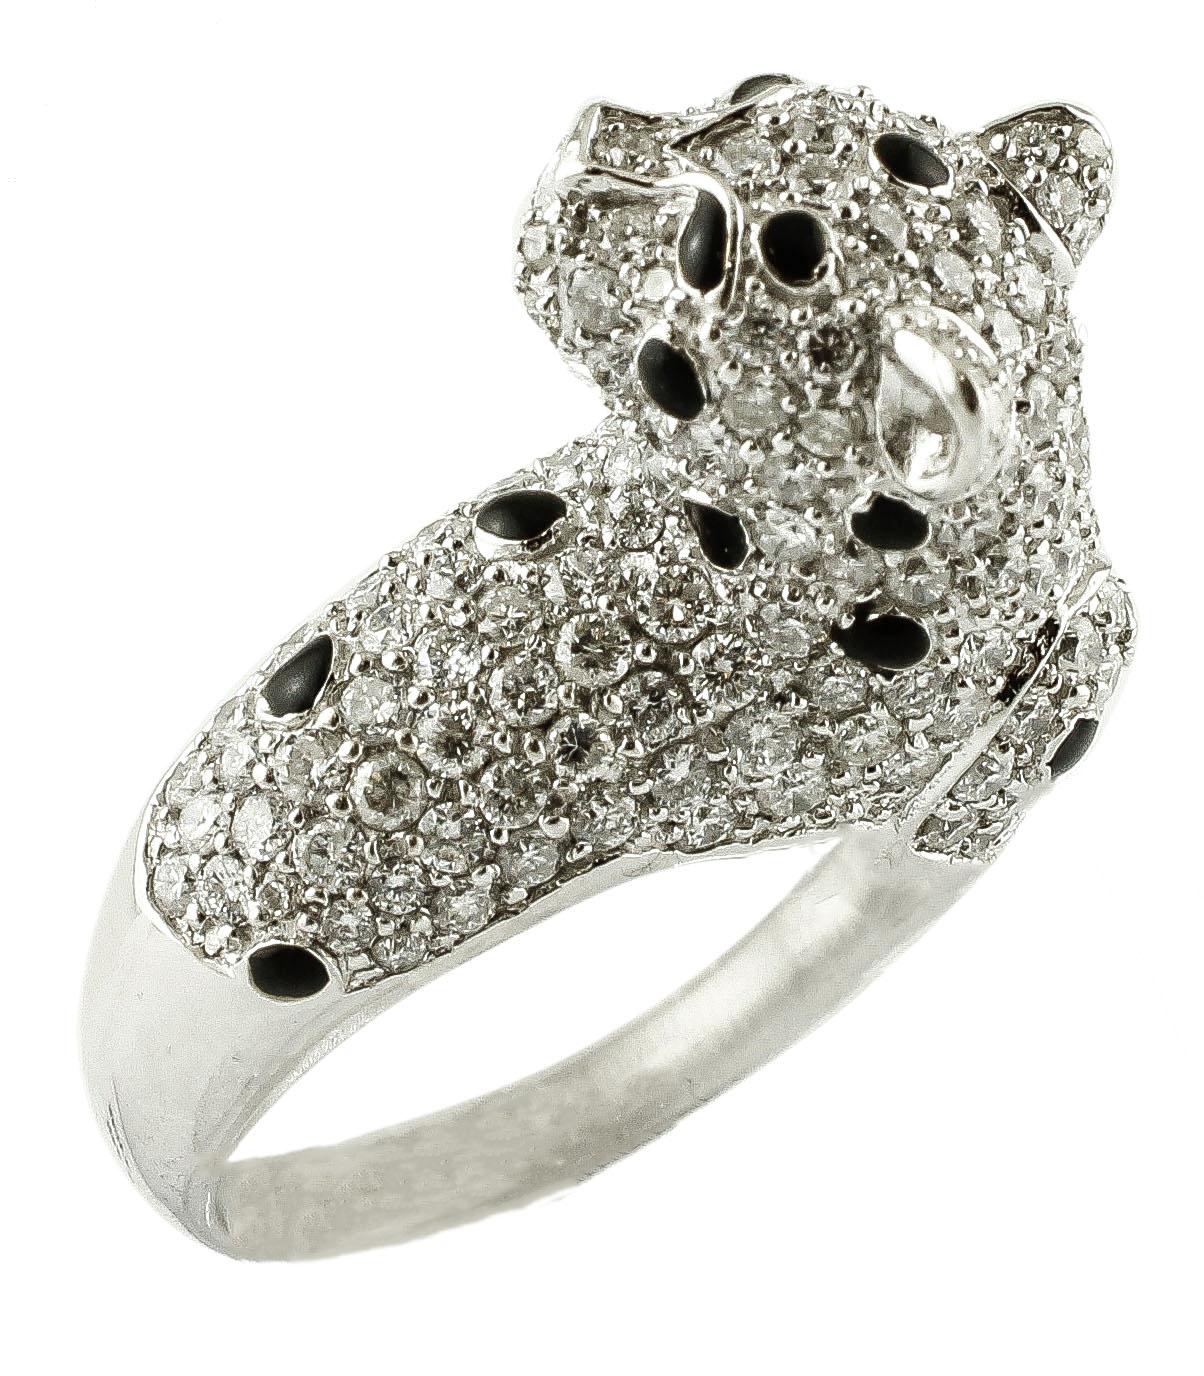 Stunning ring in 18k white gold structure realized with cheetah design totally studded with beautiful white diamonds and black enamel gold. 
The ring has Italian origin from the 1990s
Diamonds 2.79 ct
Total weigth 13.99 g
Italian size 14 / french 54